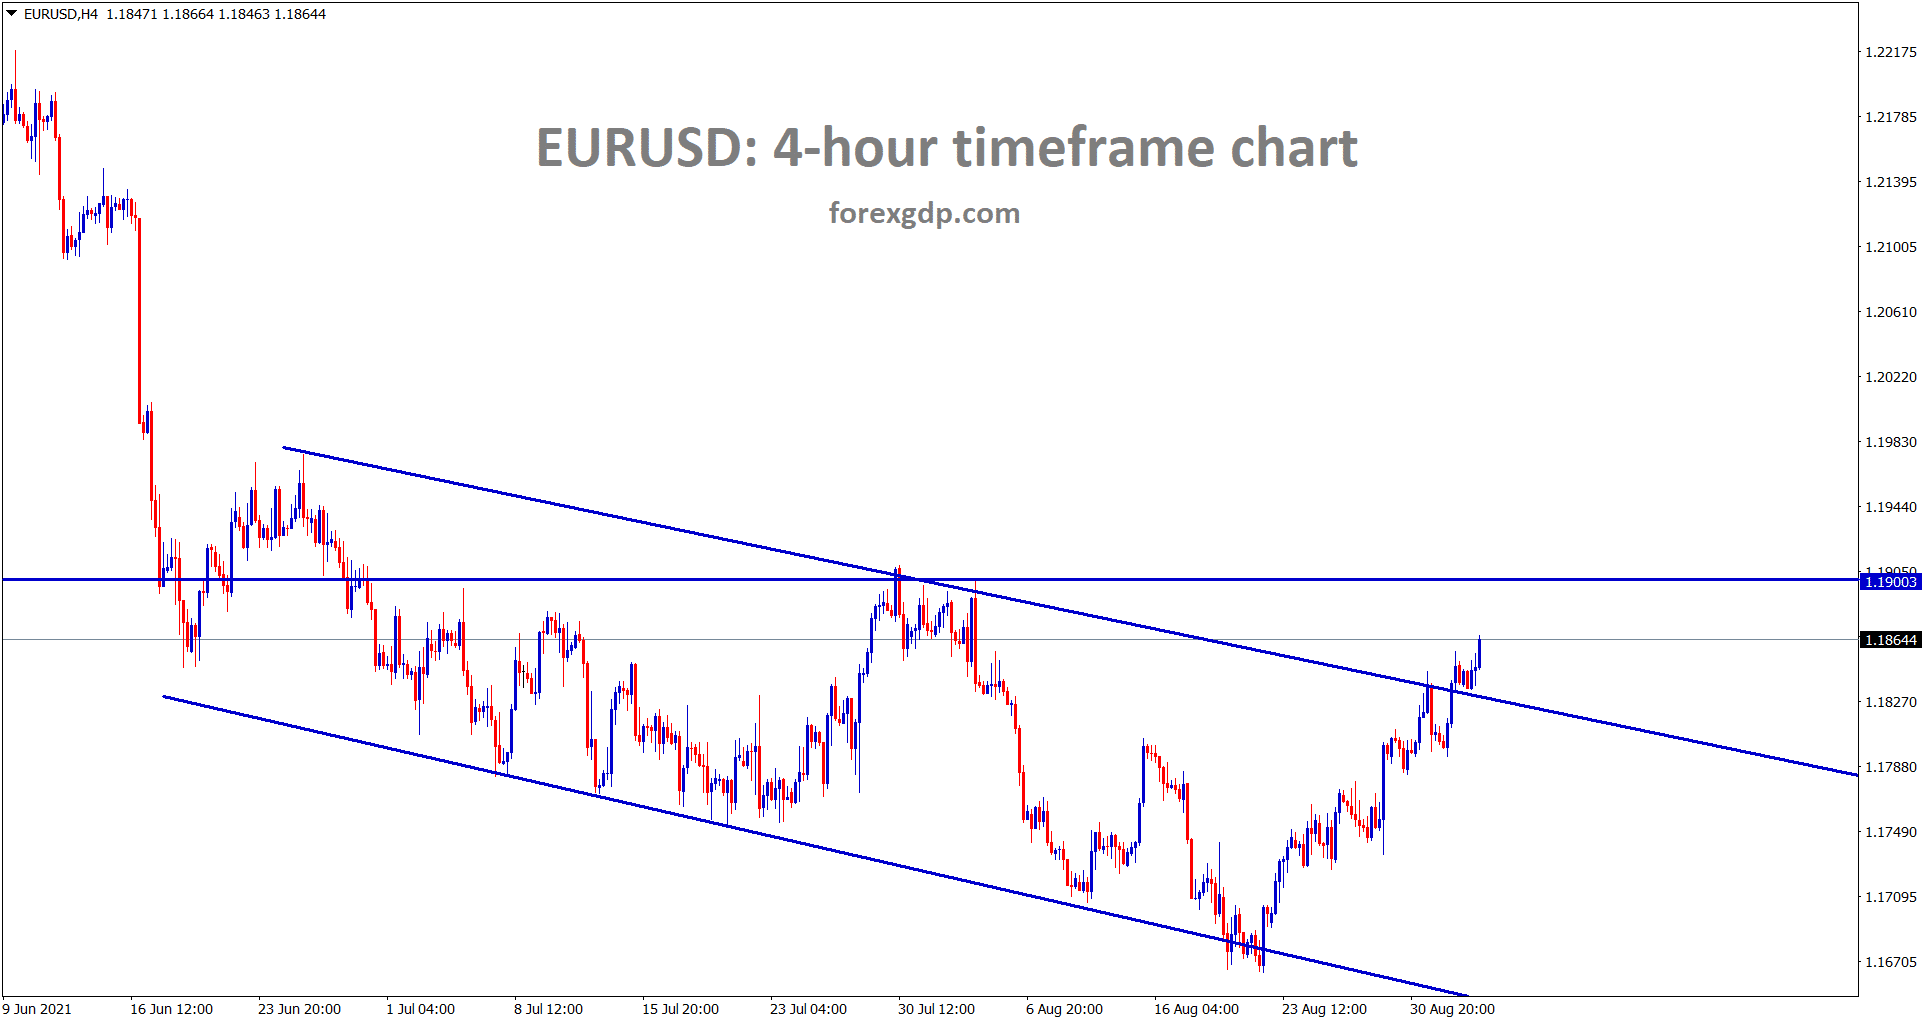 EURUSD has broken the top of the descending channel range and its going to reach the horizontal resistance area